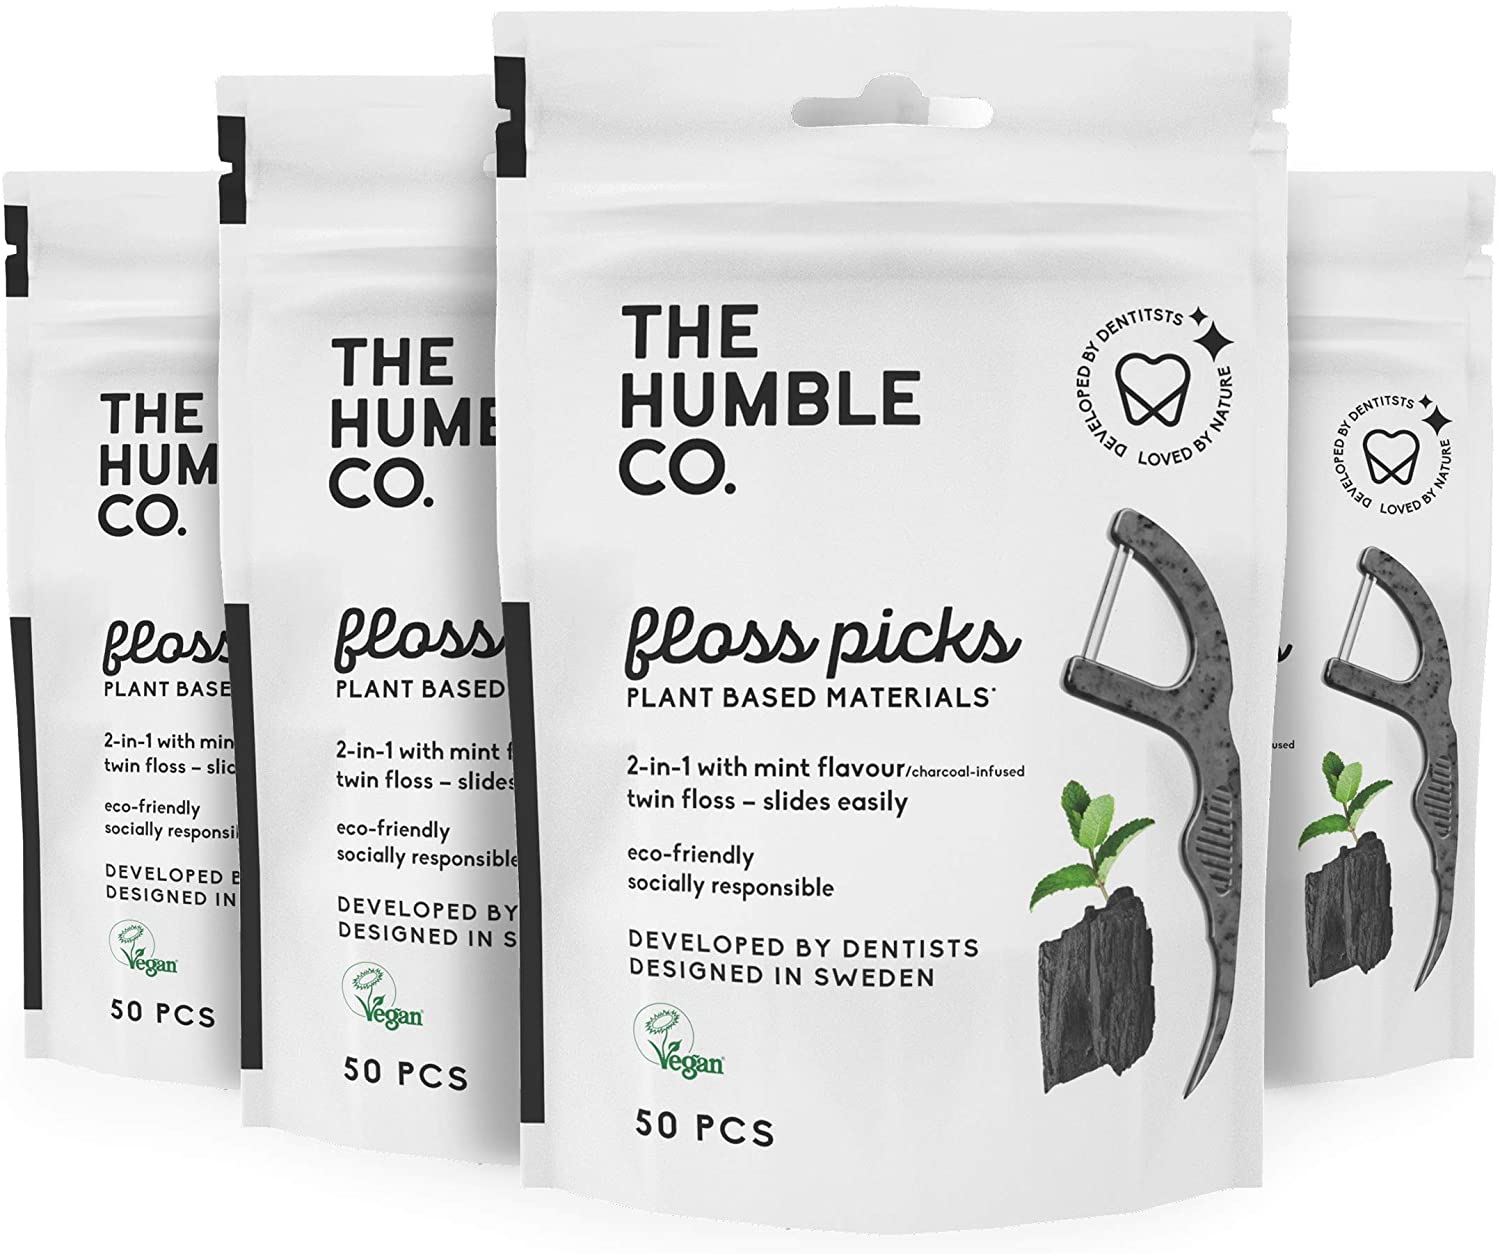 The Humble Co. Natural Vegan Tooth Floss Picks, 200-Count